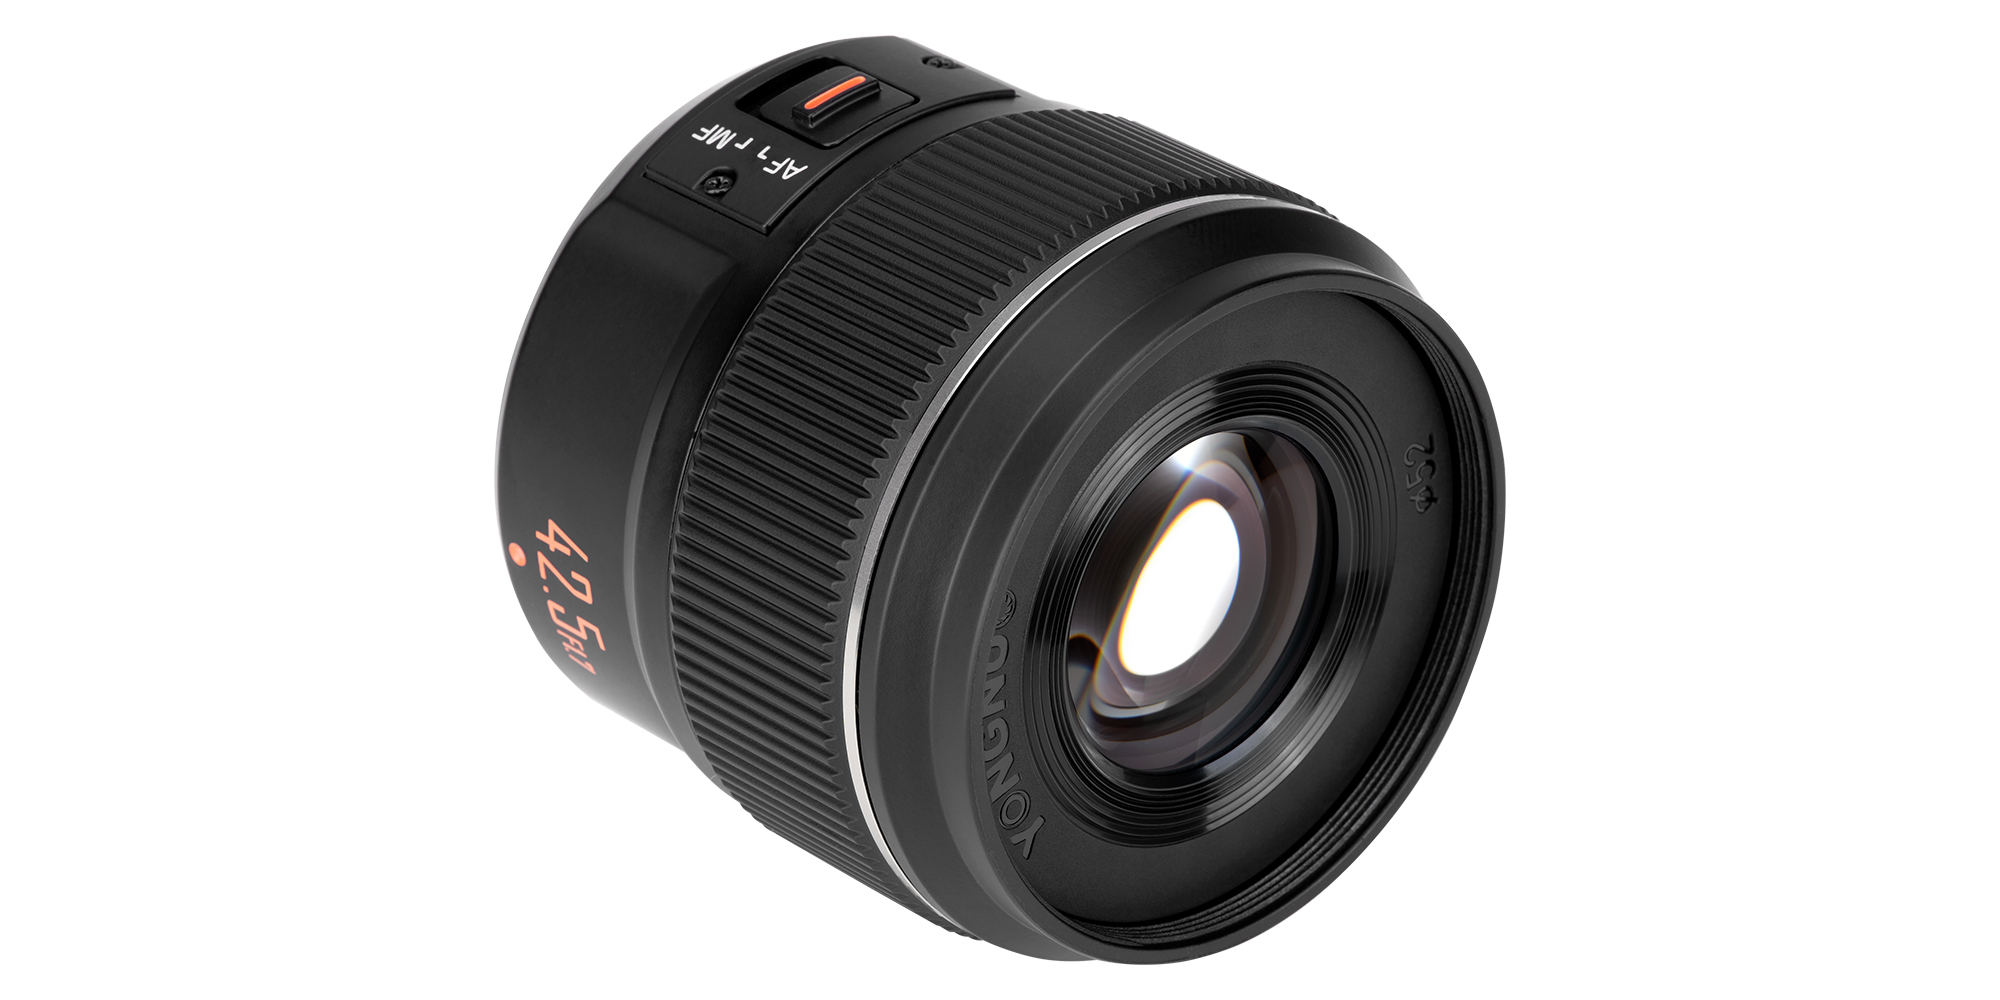 Yongnuo YN 35mm f/1.4 DF UWM lens for Canon EF - New housing and even better performance